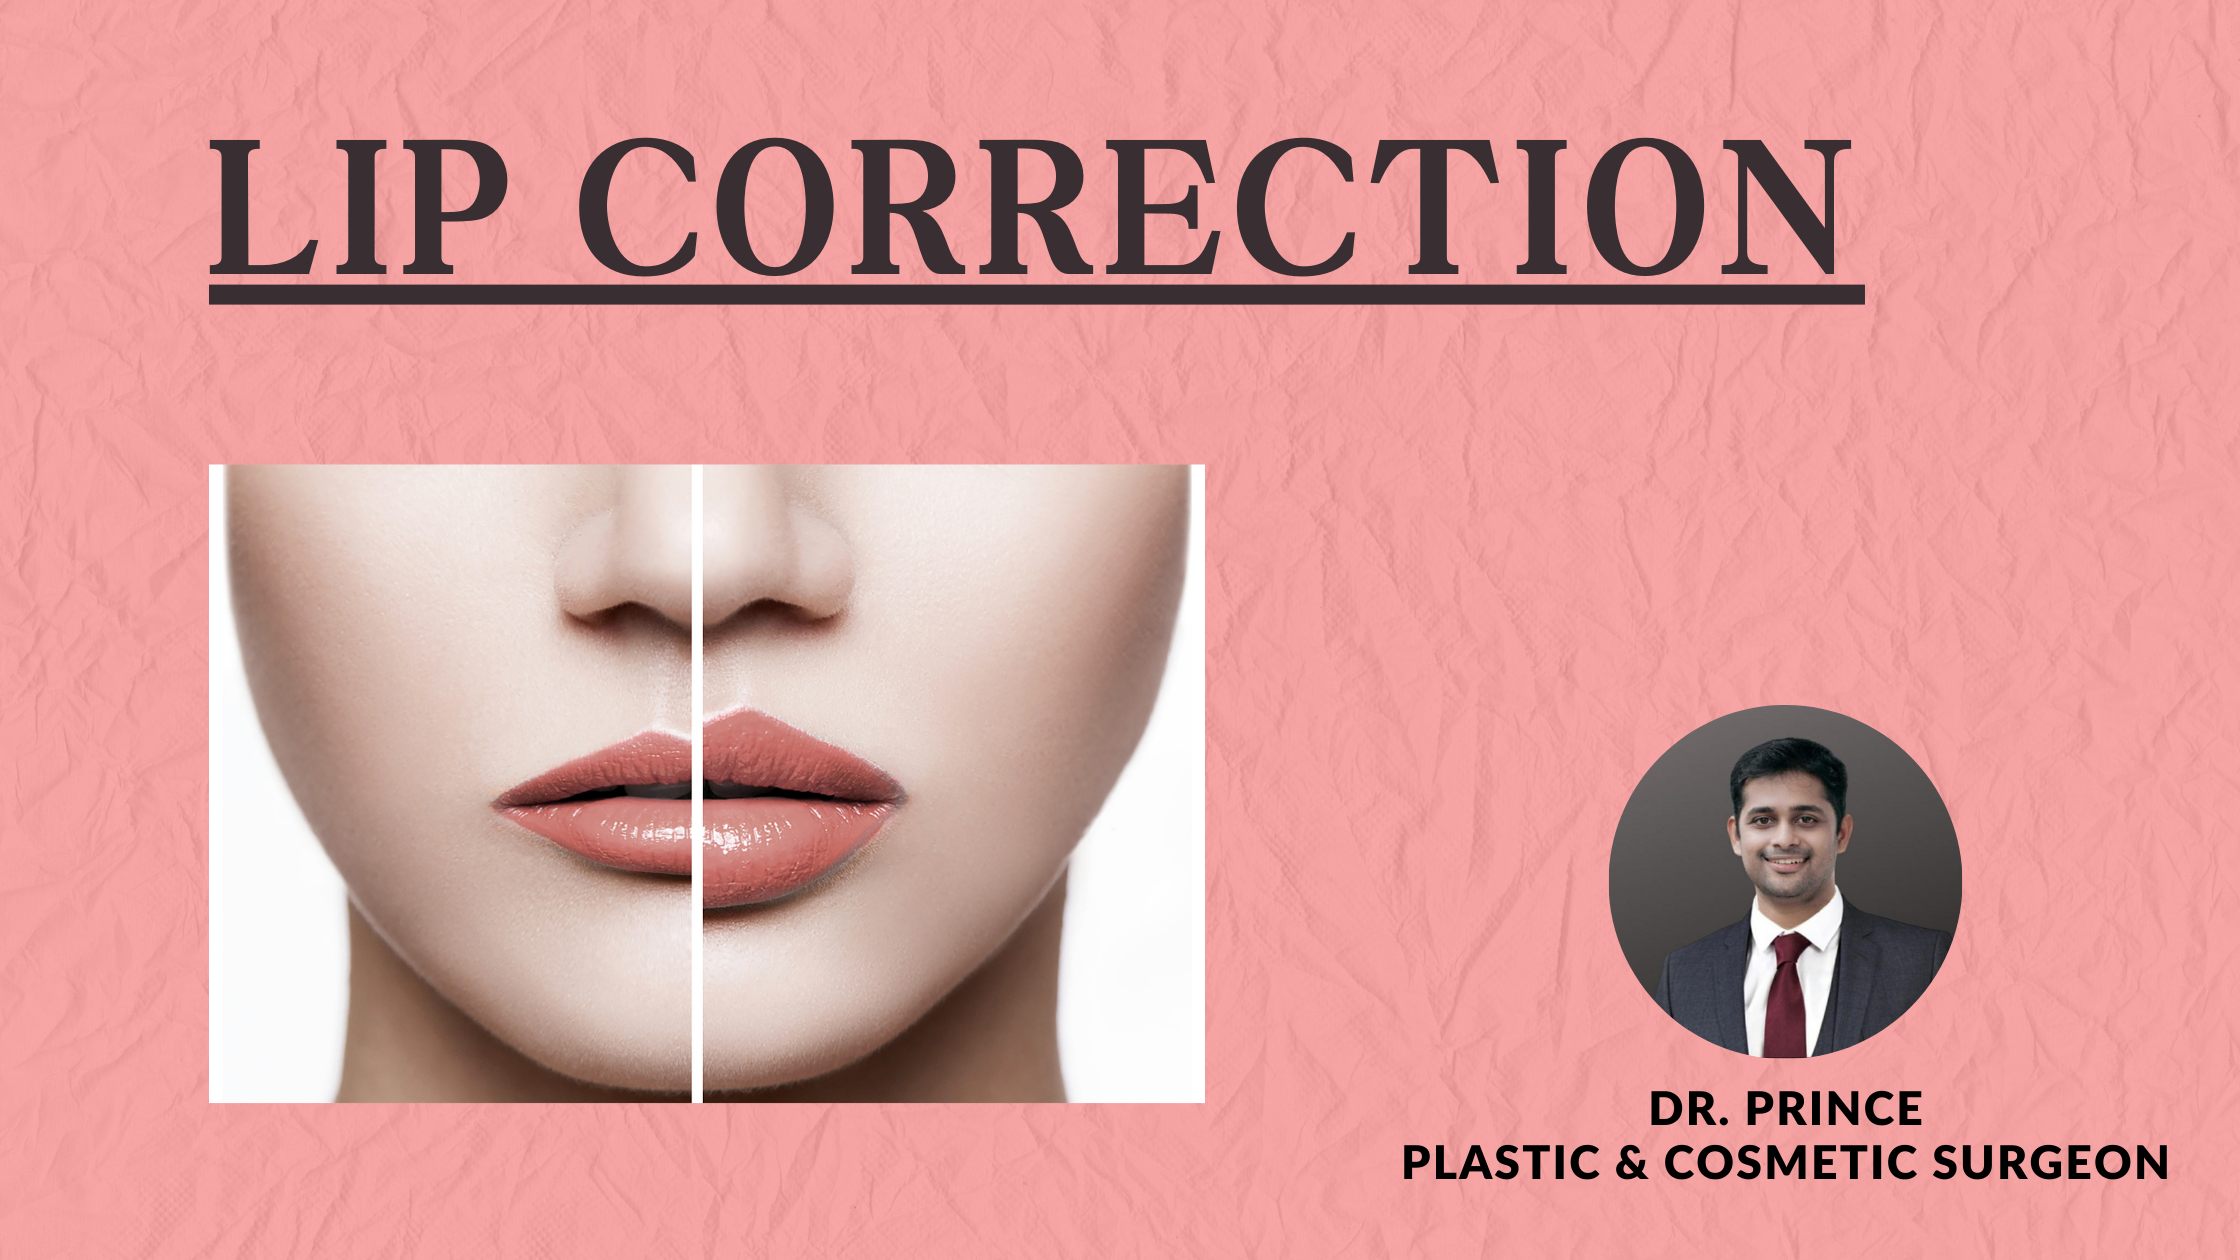 Dr. Prince performs lip correction, skillfully restoring natural symmetry and enhancing facial features for a harmonious appearance.